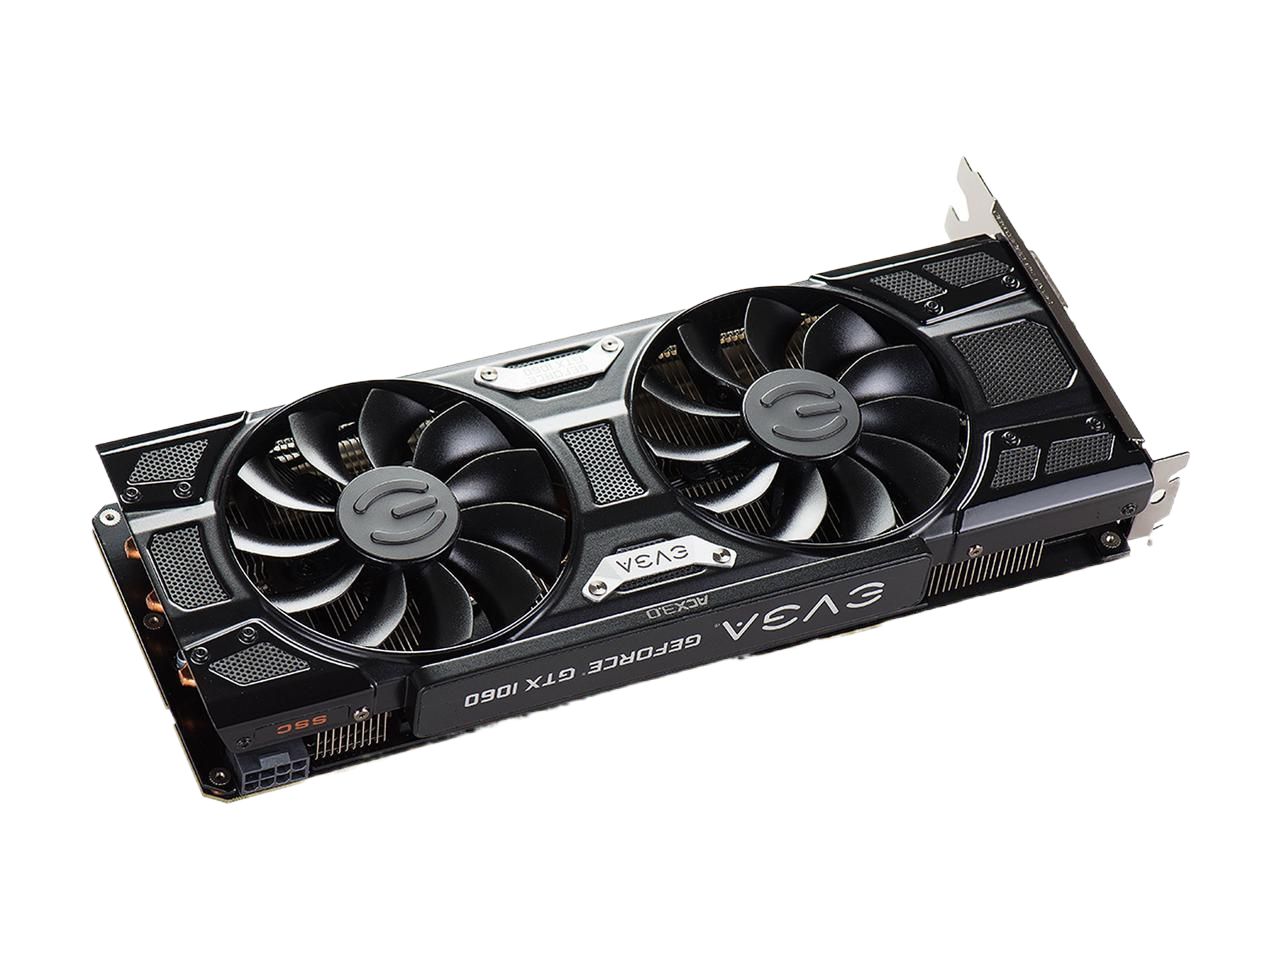 EVGA GeForce GTX 1060 3GB SSC GAMING 3GB GDDR5 ACX 3.0 LED DX12 OSD Support (PXOC) Video Graphics Card 03G-P4-6167-KR